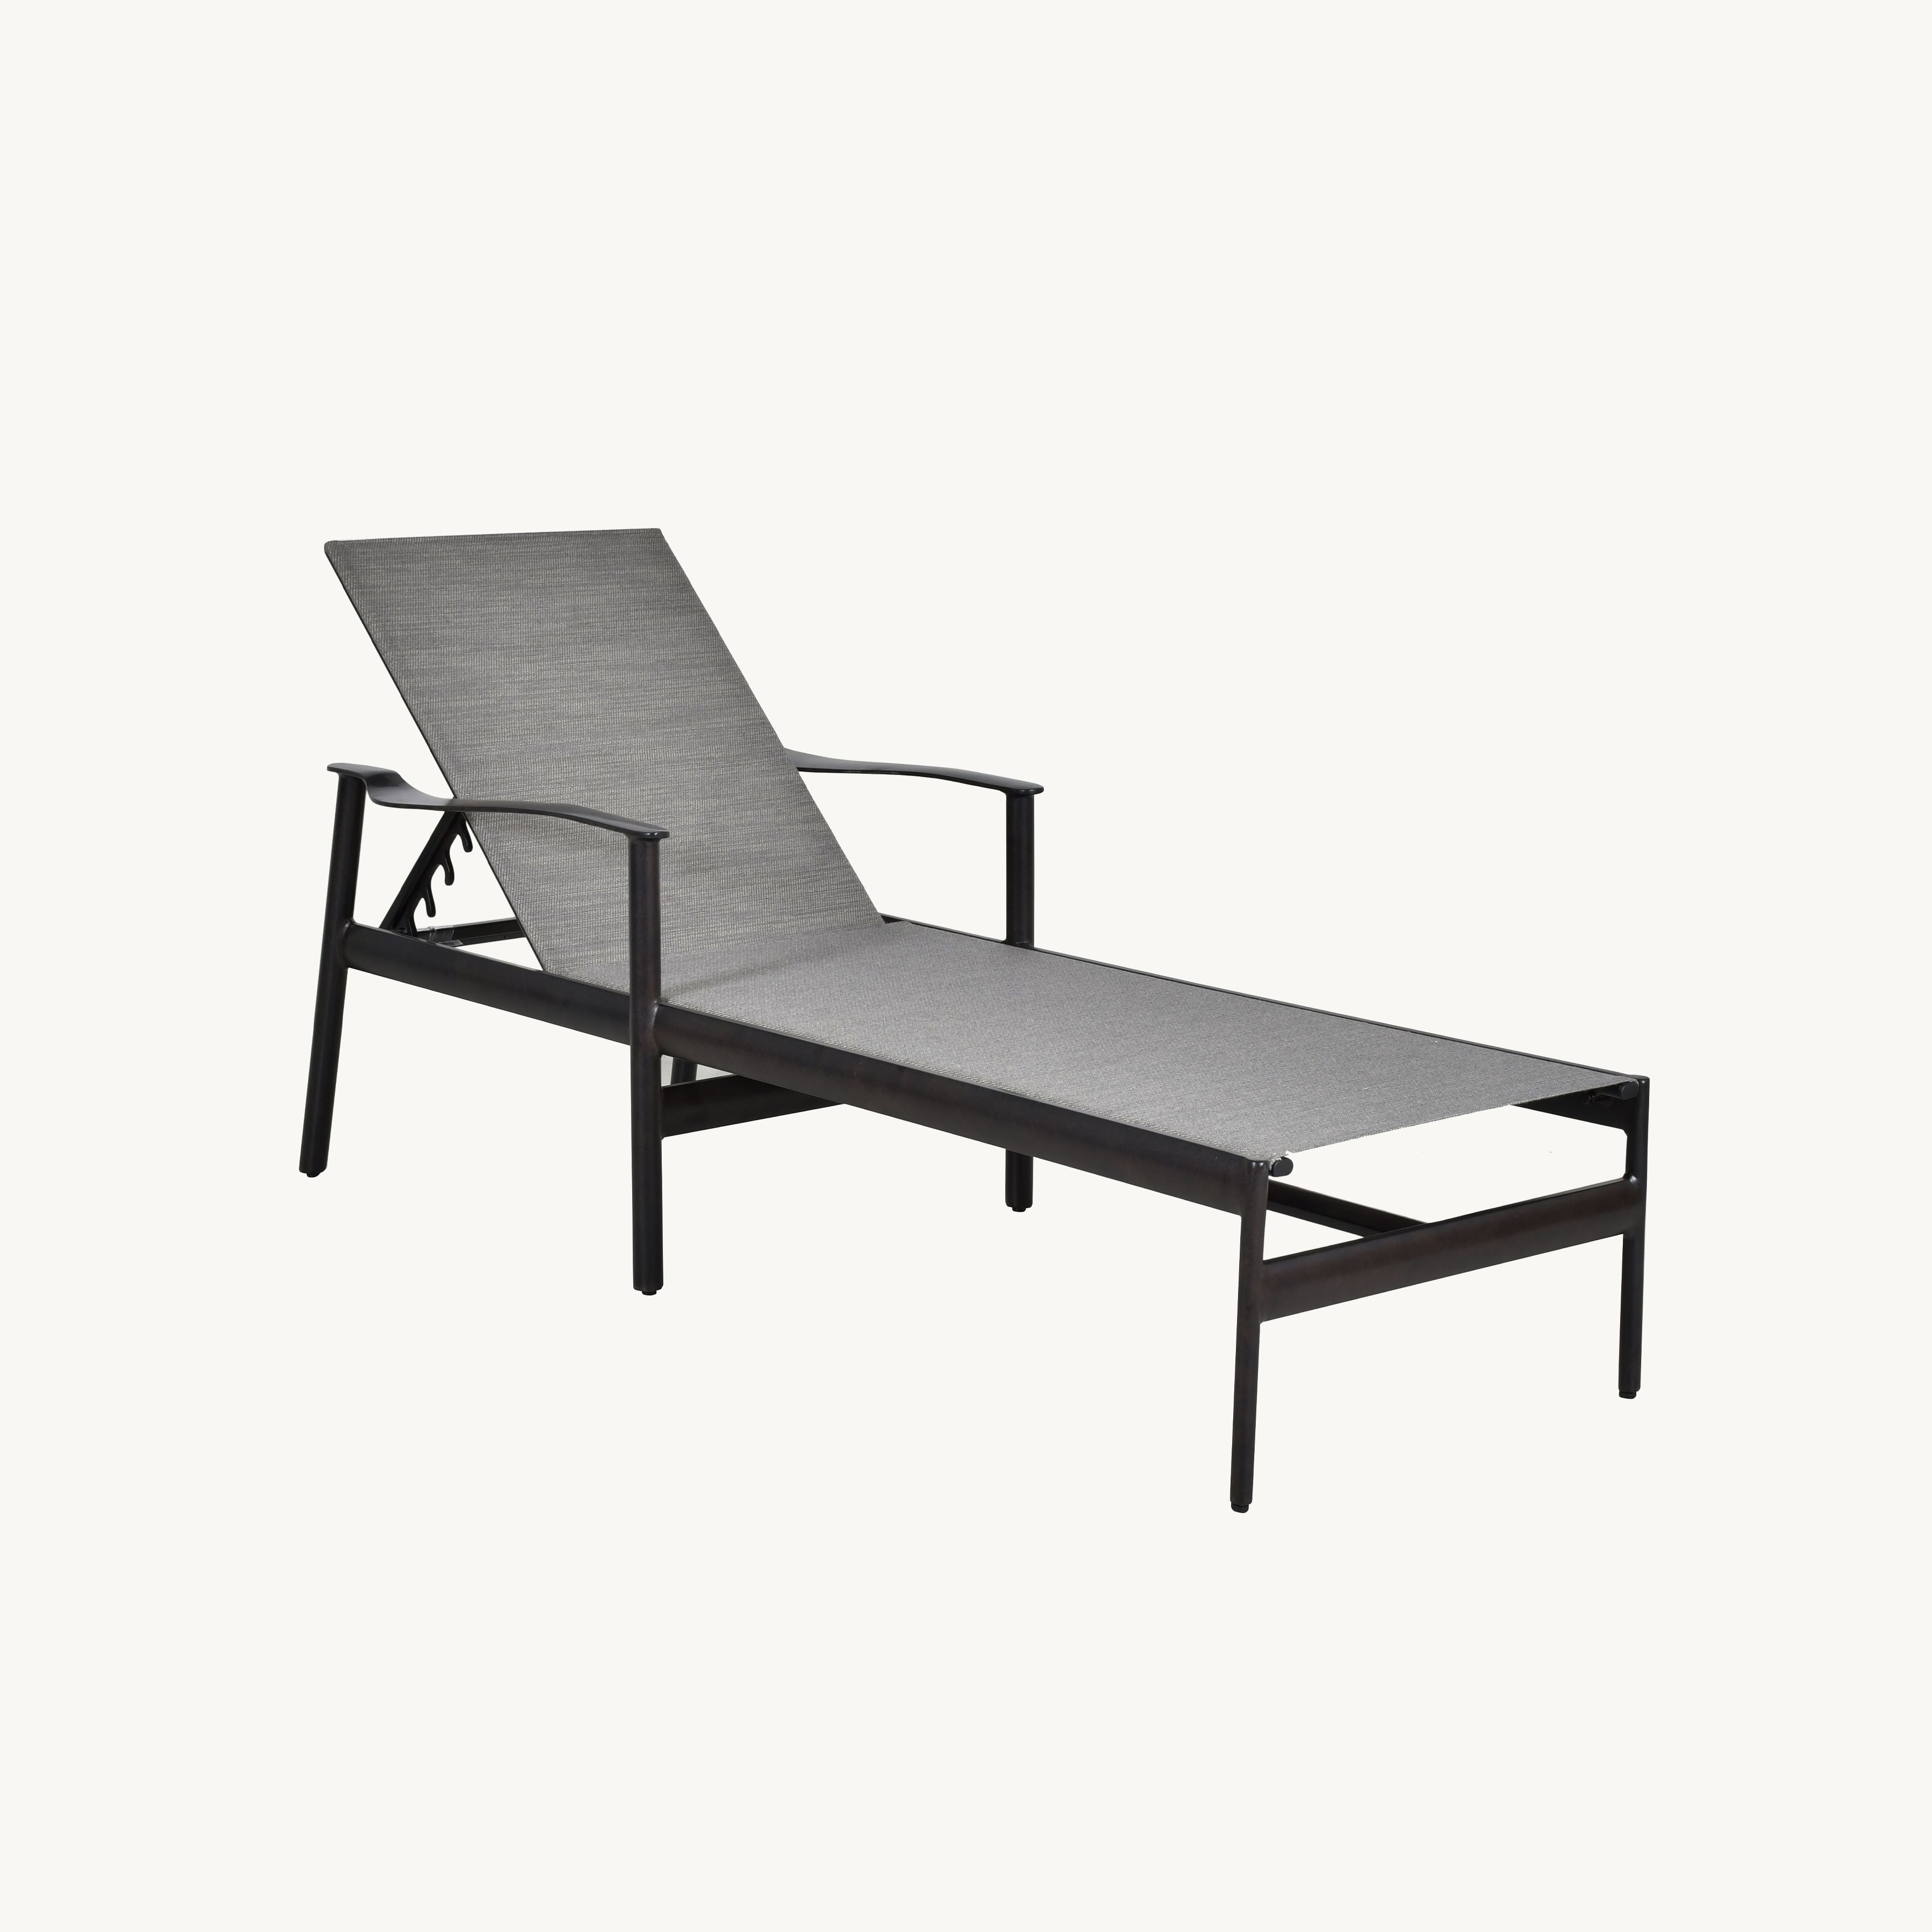 Barbados Sling Chaise By Castelle